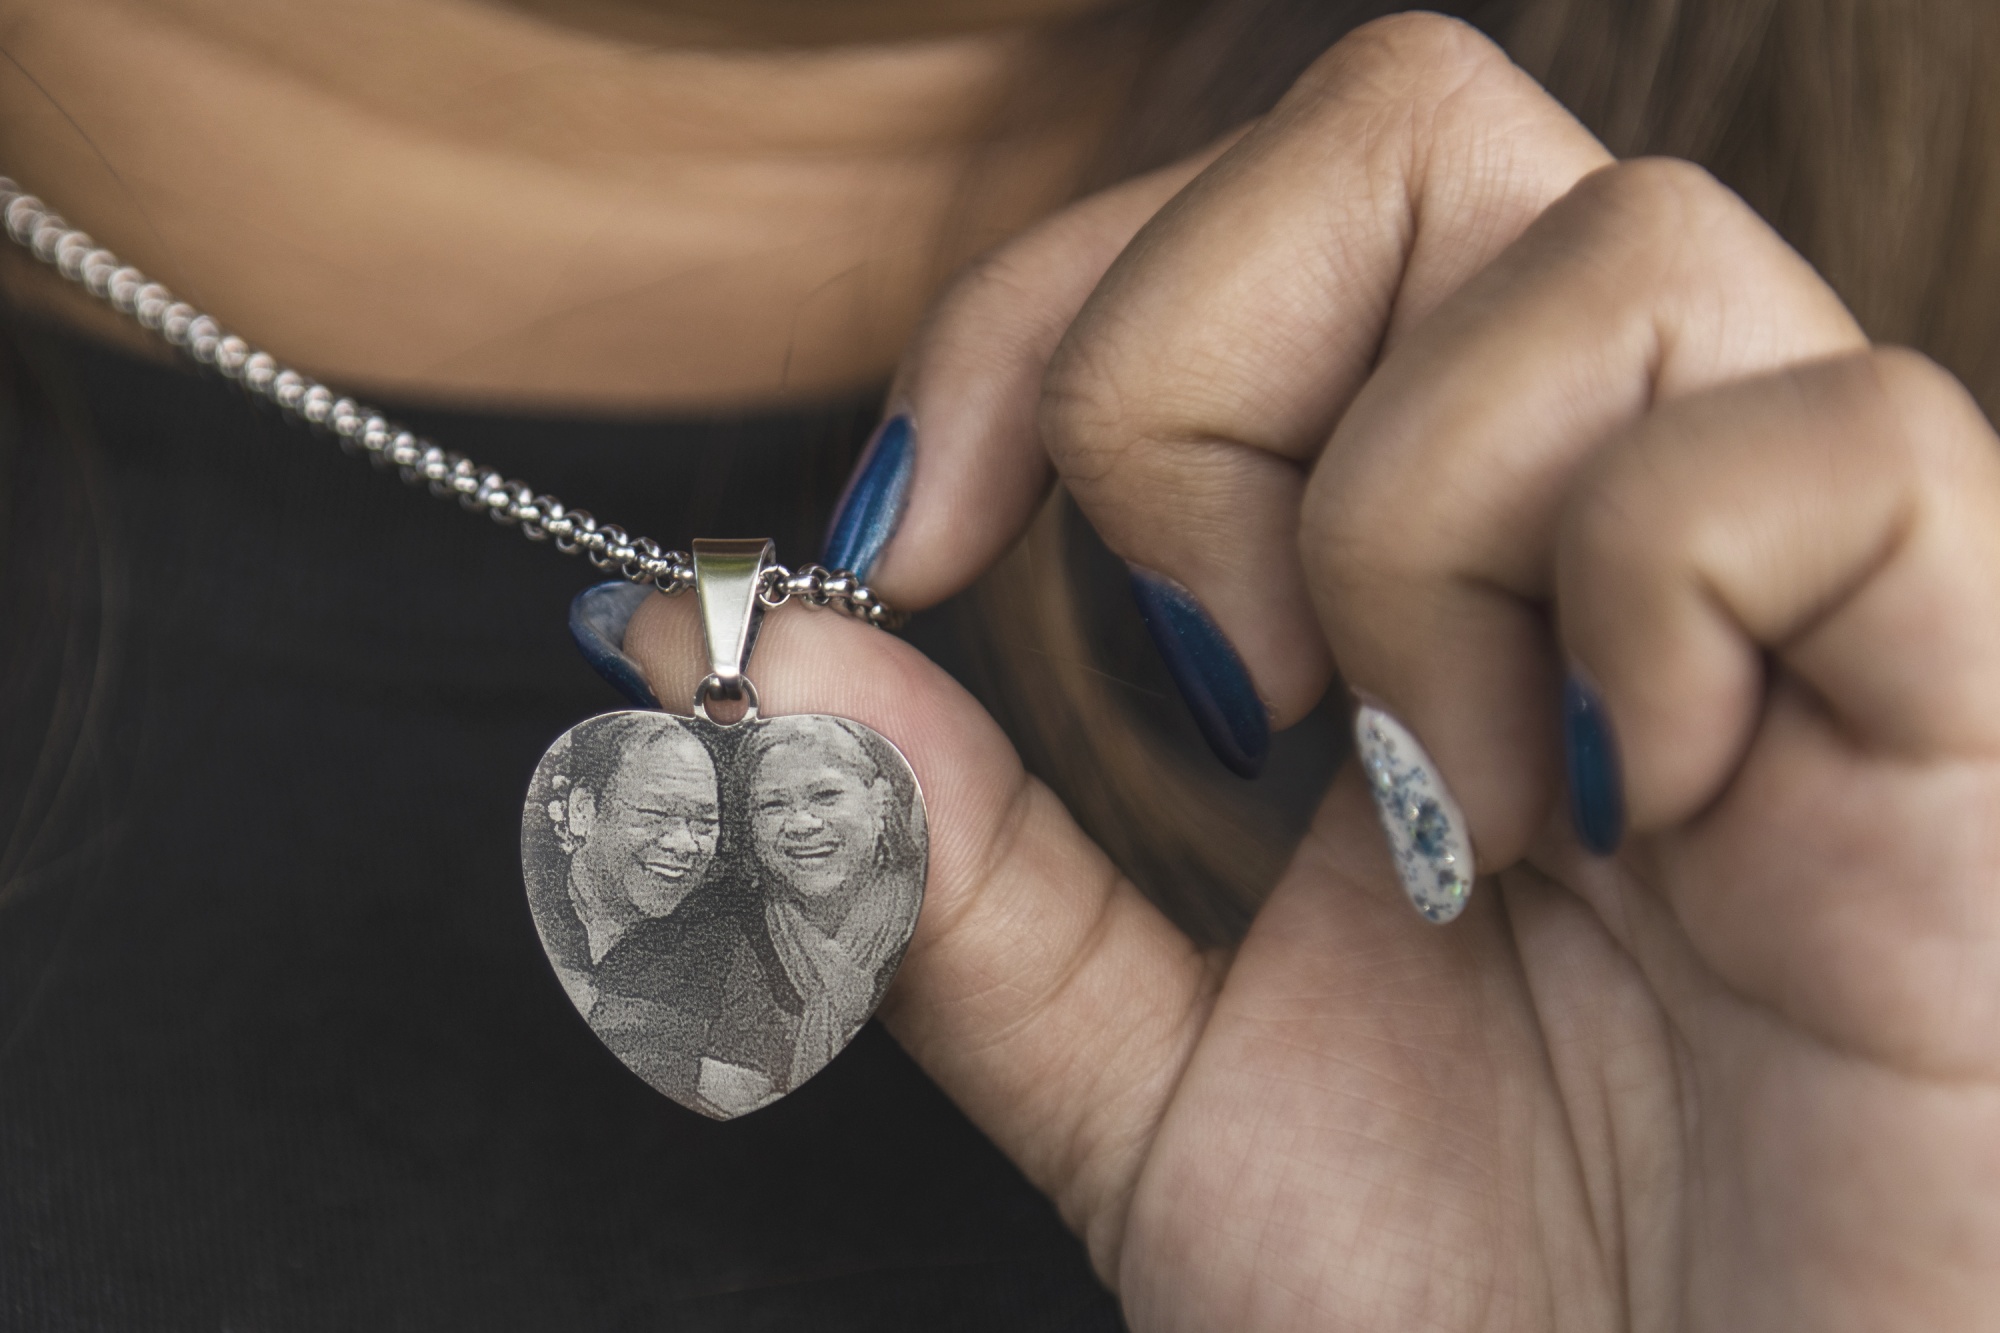 Sheryl Pabatao holds a necklace with a photo of her parents Susana and Alfredo Pabatao who both died of COVID-19.